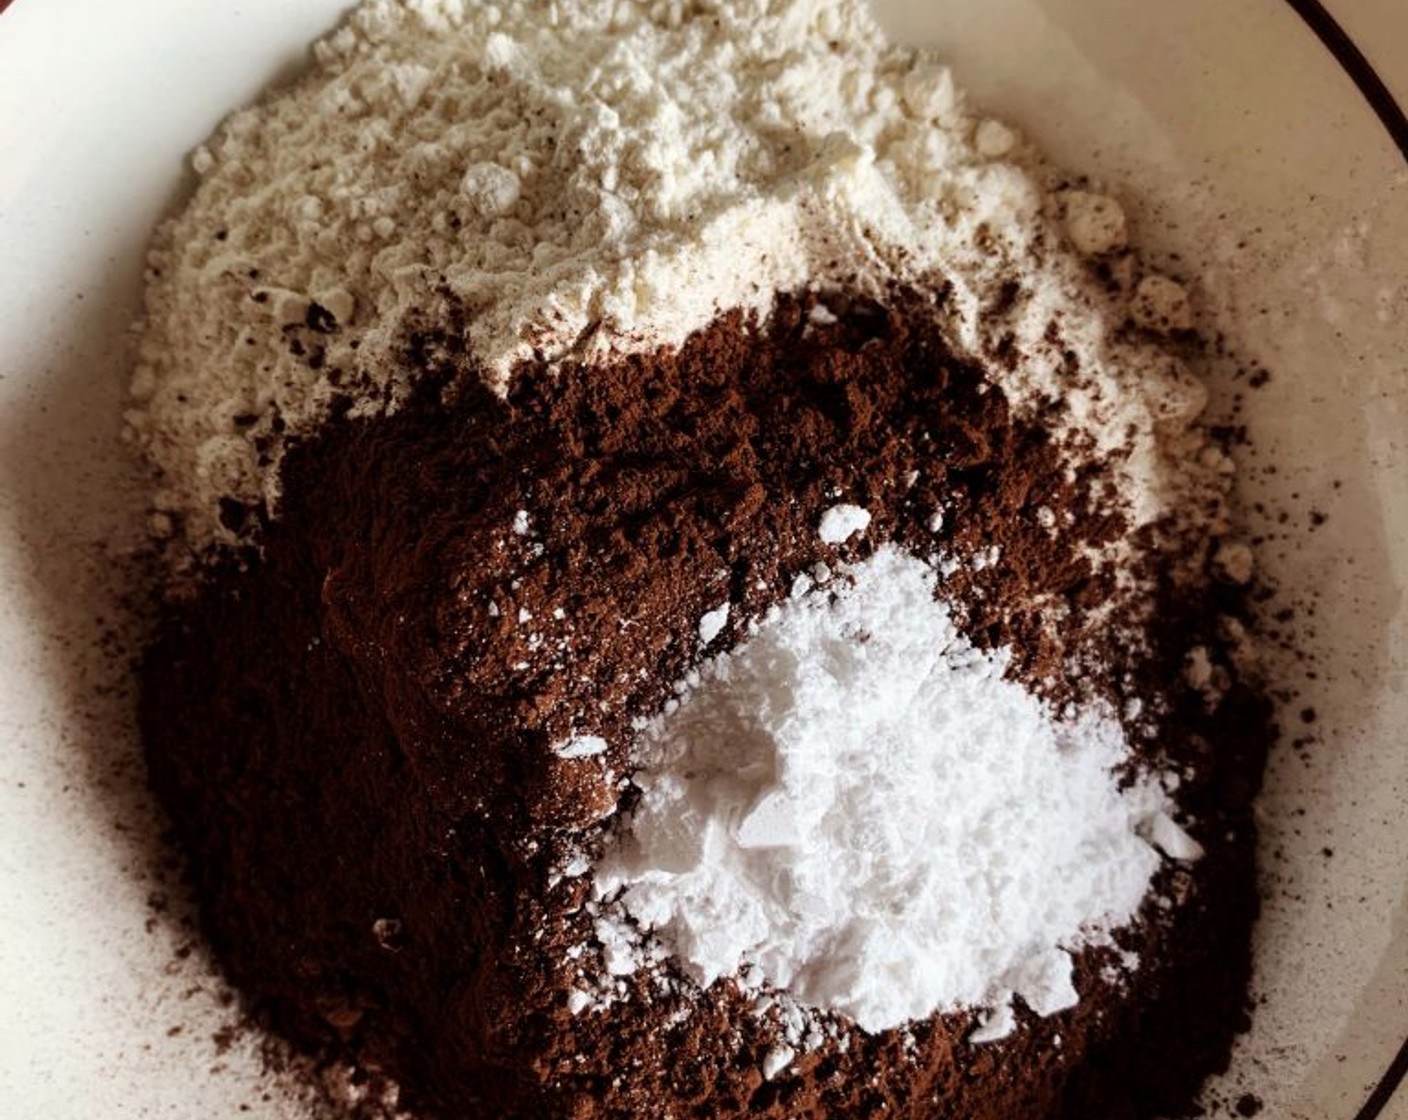 step 4 In a separate bowl combine Whole Wheat Flour (3/4 cup), Unsweetened Cocoa Powder (3/4 cup), Corn Starch (1/4 cup), and Baking Powder (1 Tbsp).